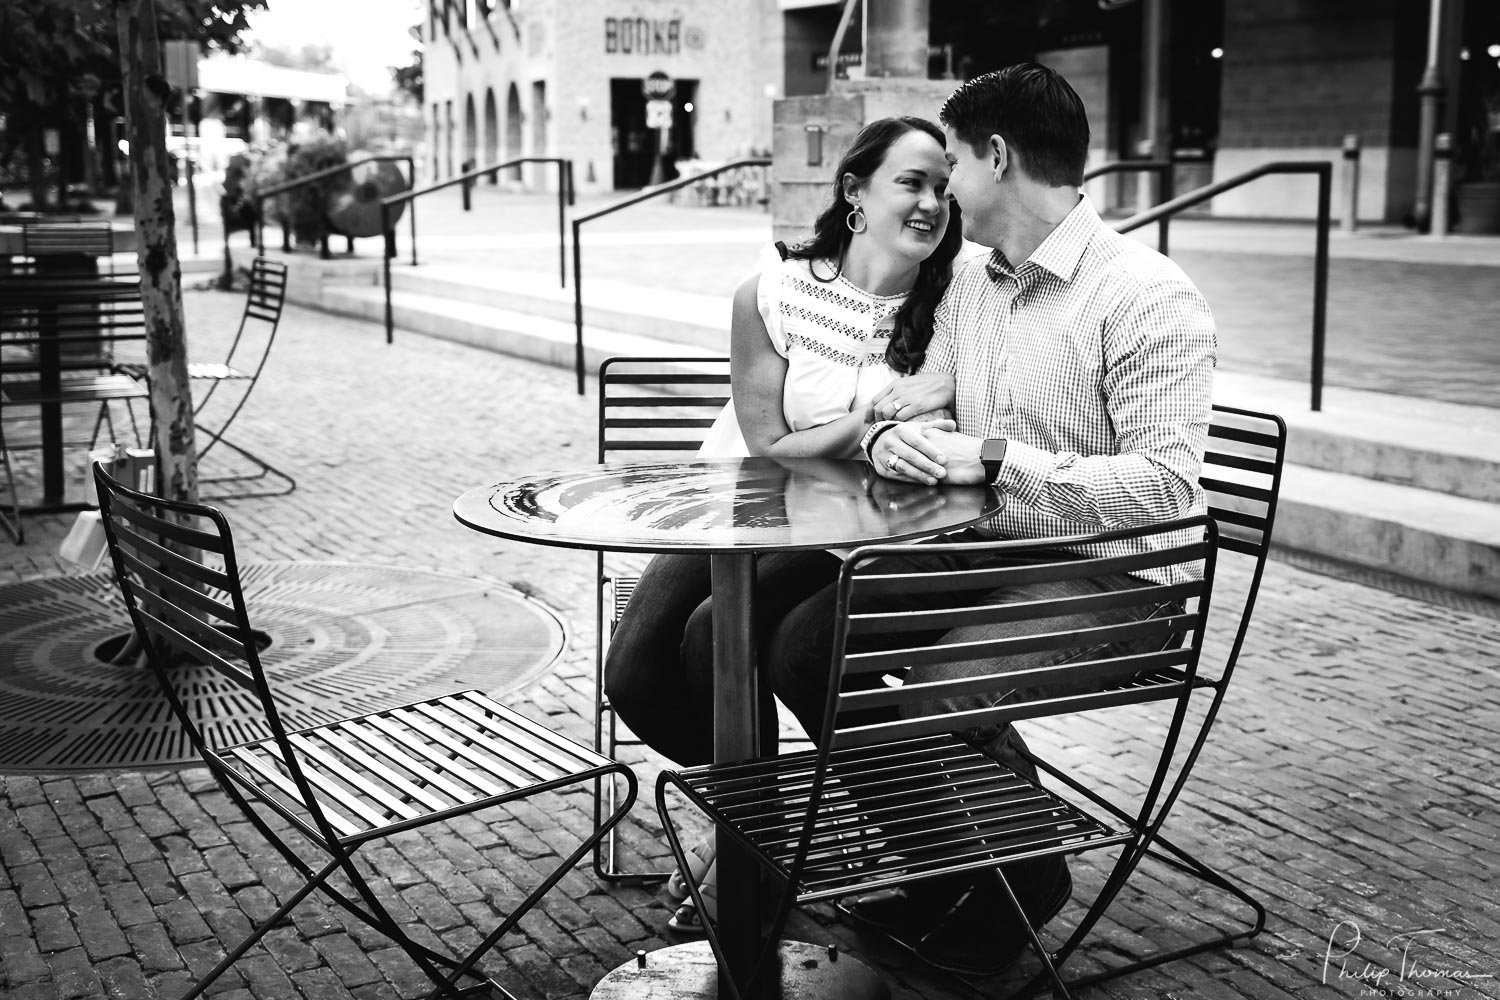 The-Pearl-Brewery-Engagement-Session-north-of-downtown-San-Antonio-Texas-